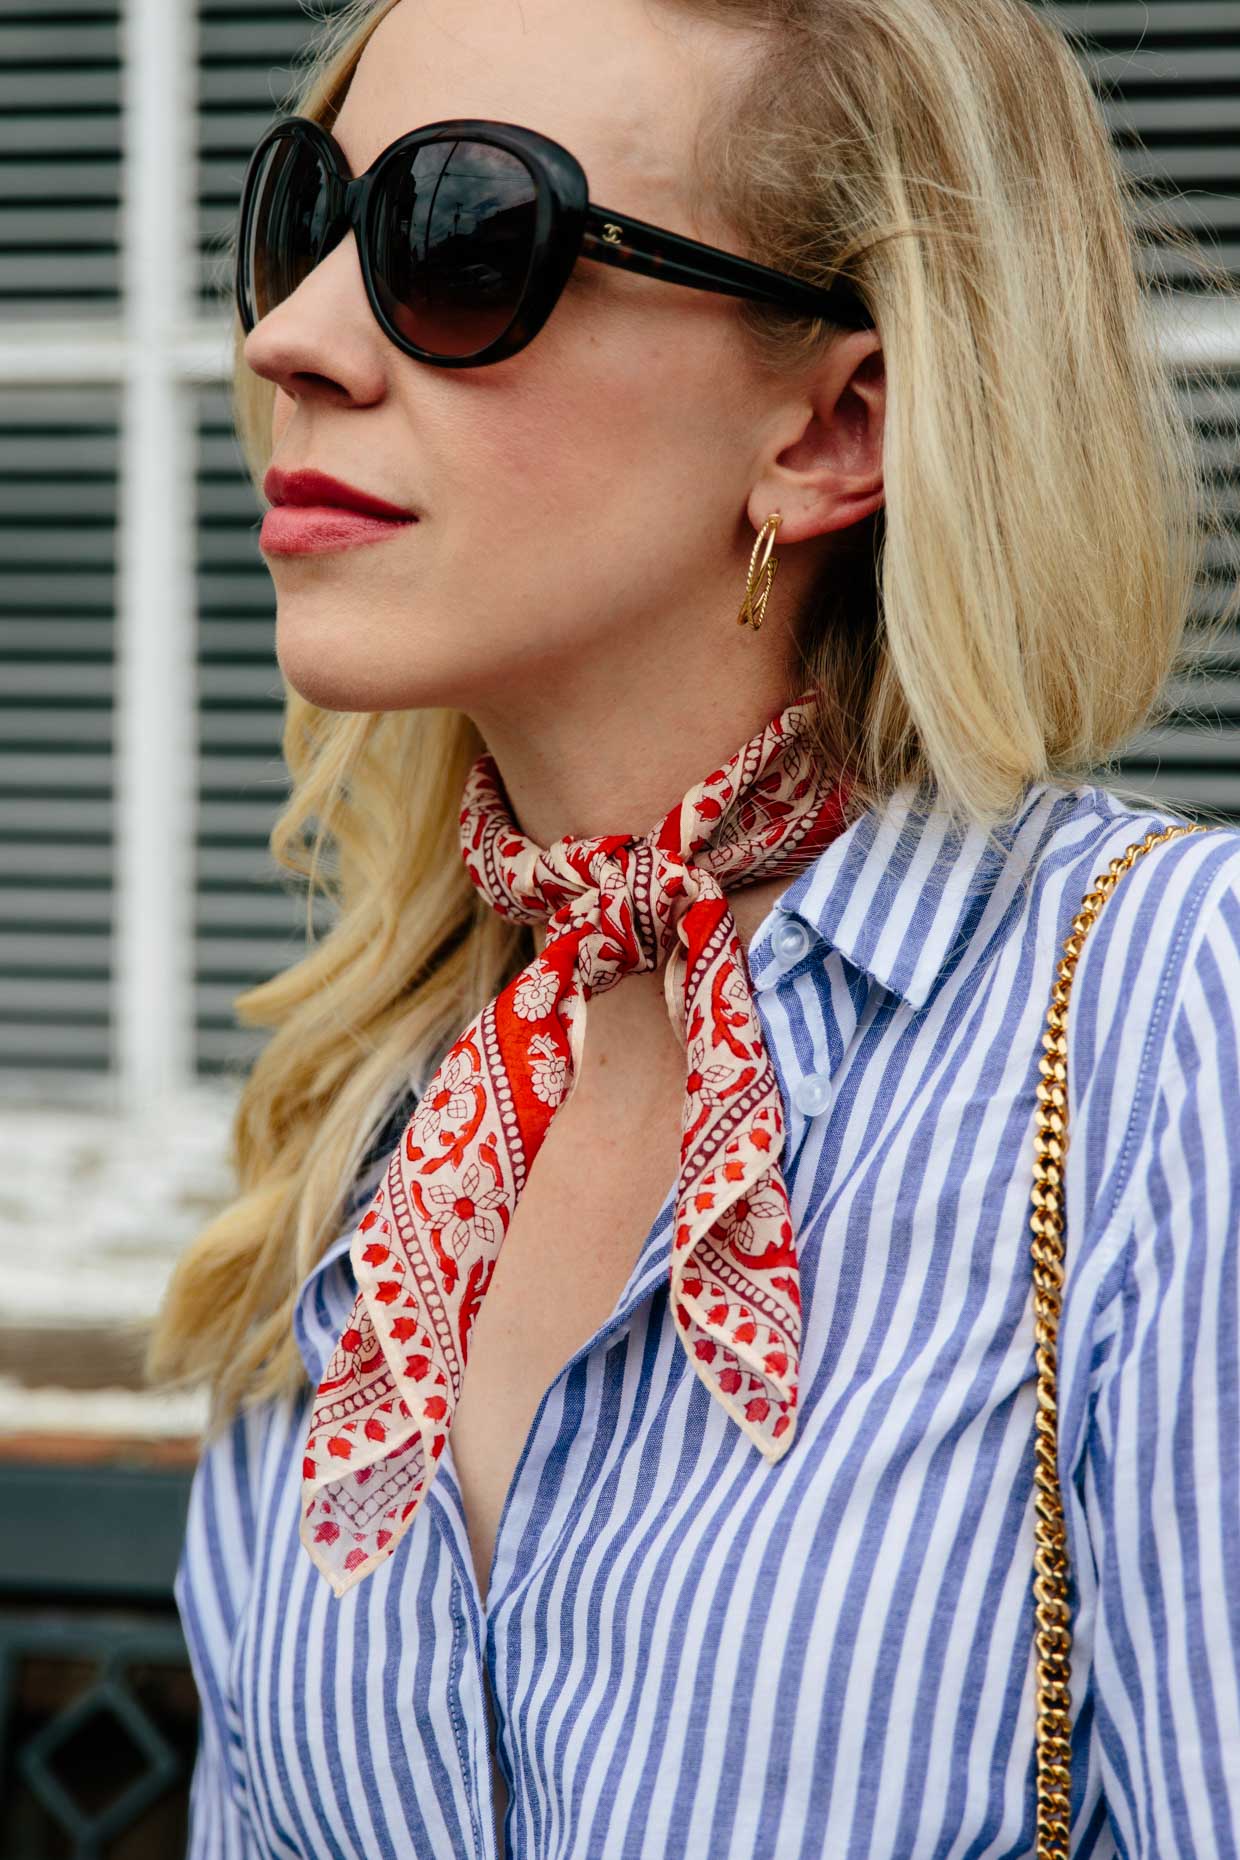 A Simple & Stylish Way to Wear Red, White & Blue - Meagan's Moda